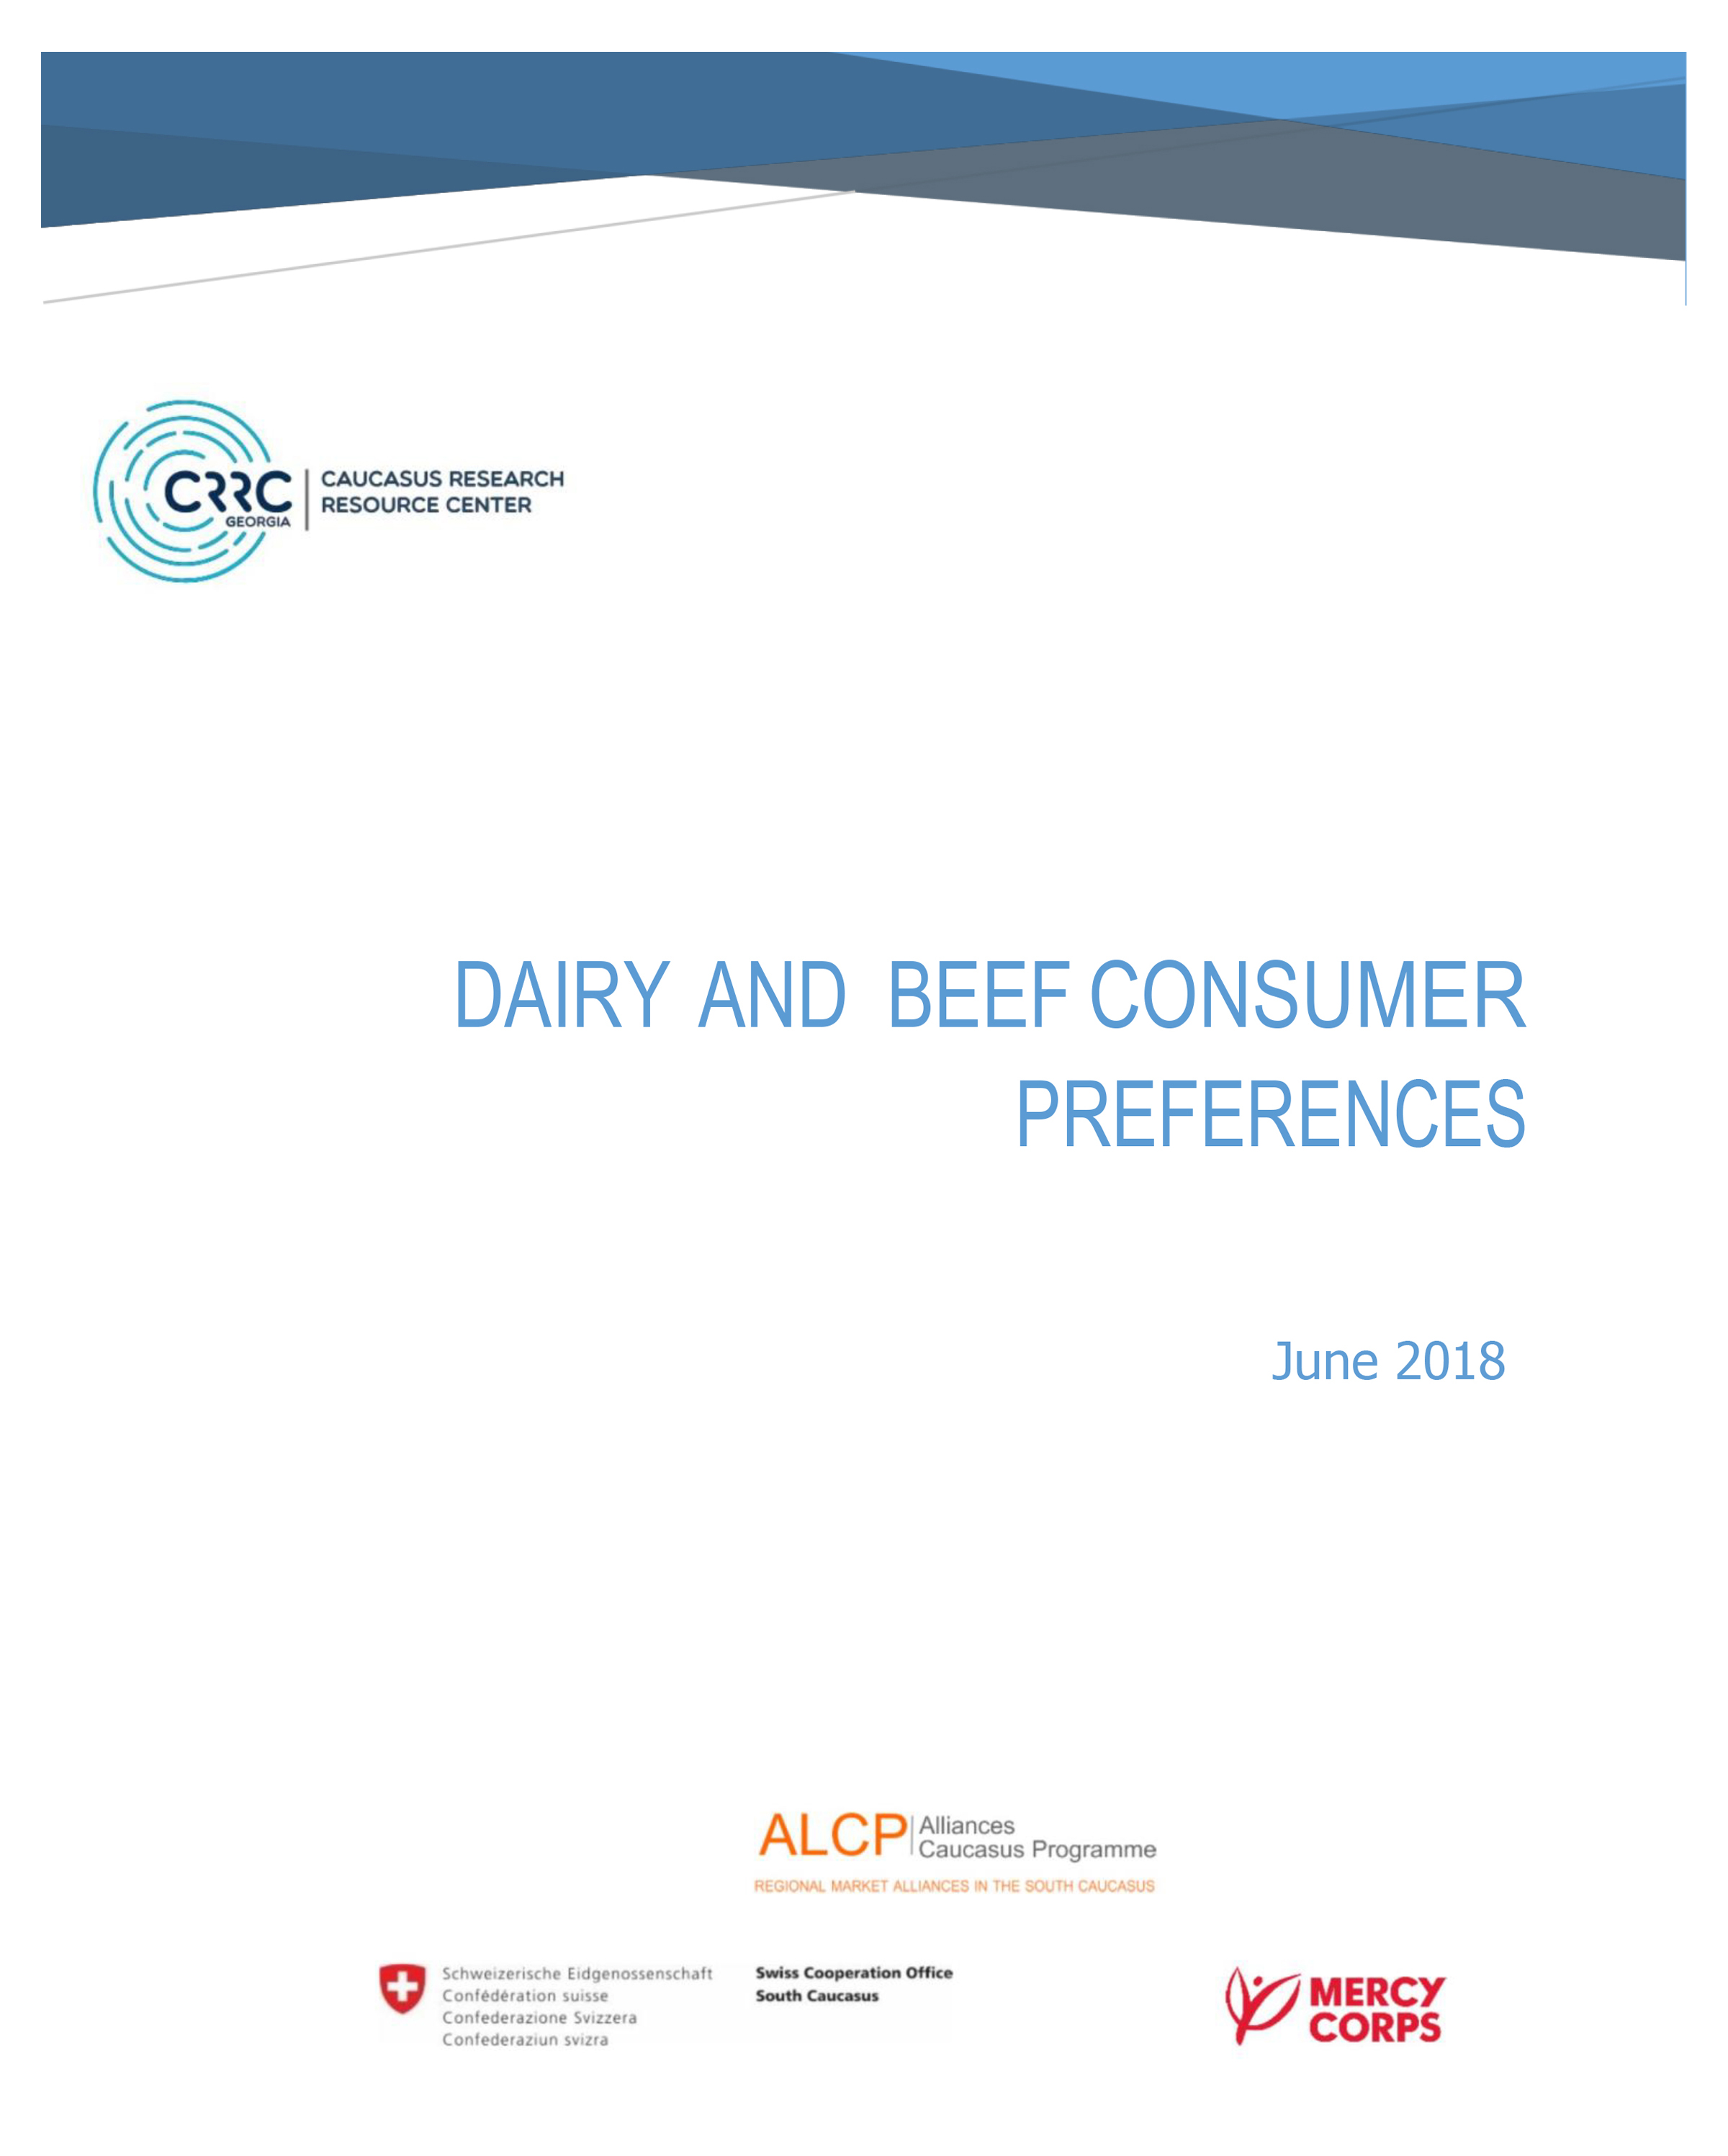 Dairy and Beef Consumer Preferences - June 2018